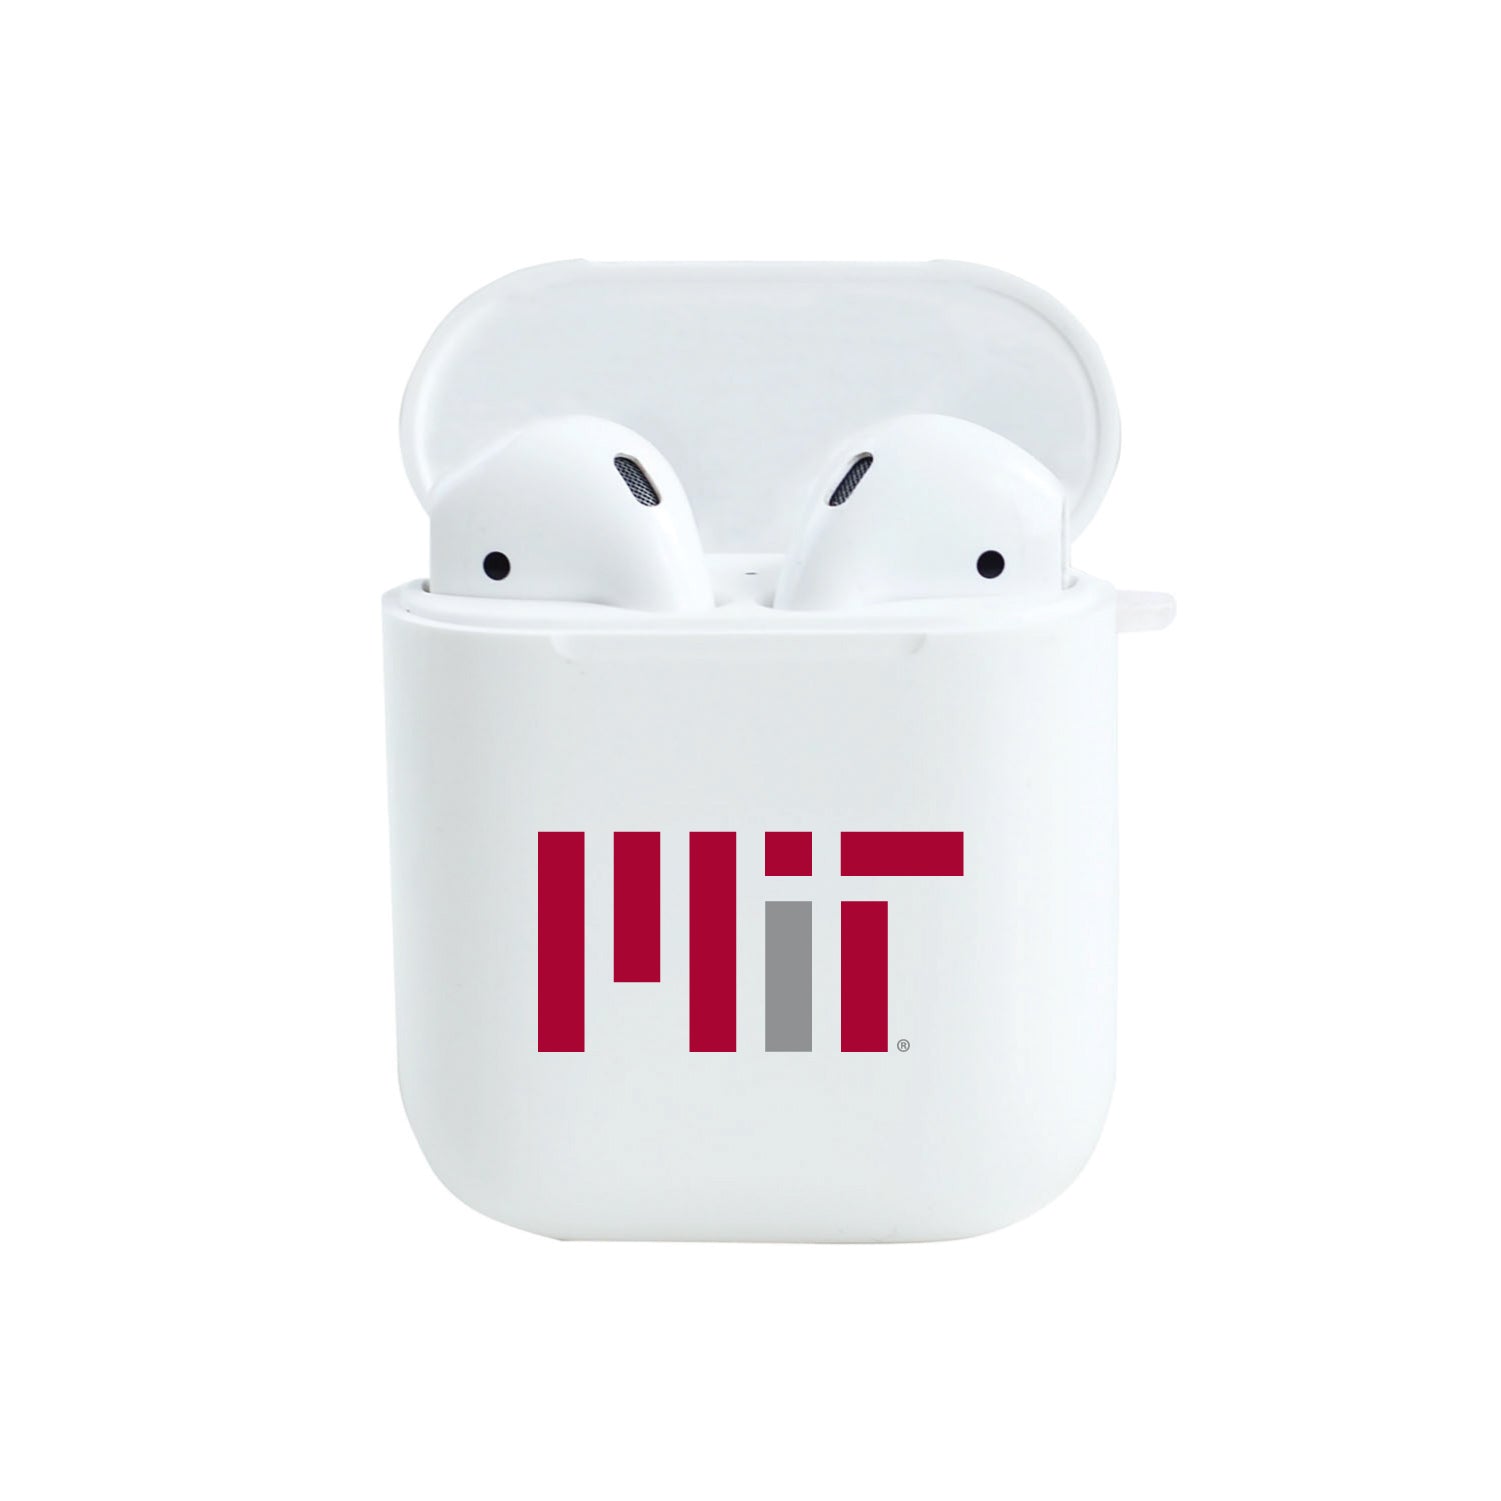 Otm Essentials | University of Southern California Classic AirPods Case AirPods Pro / White